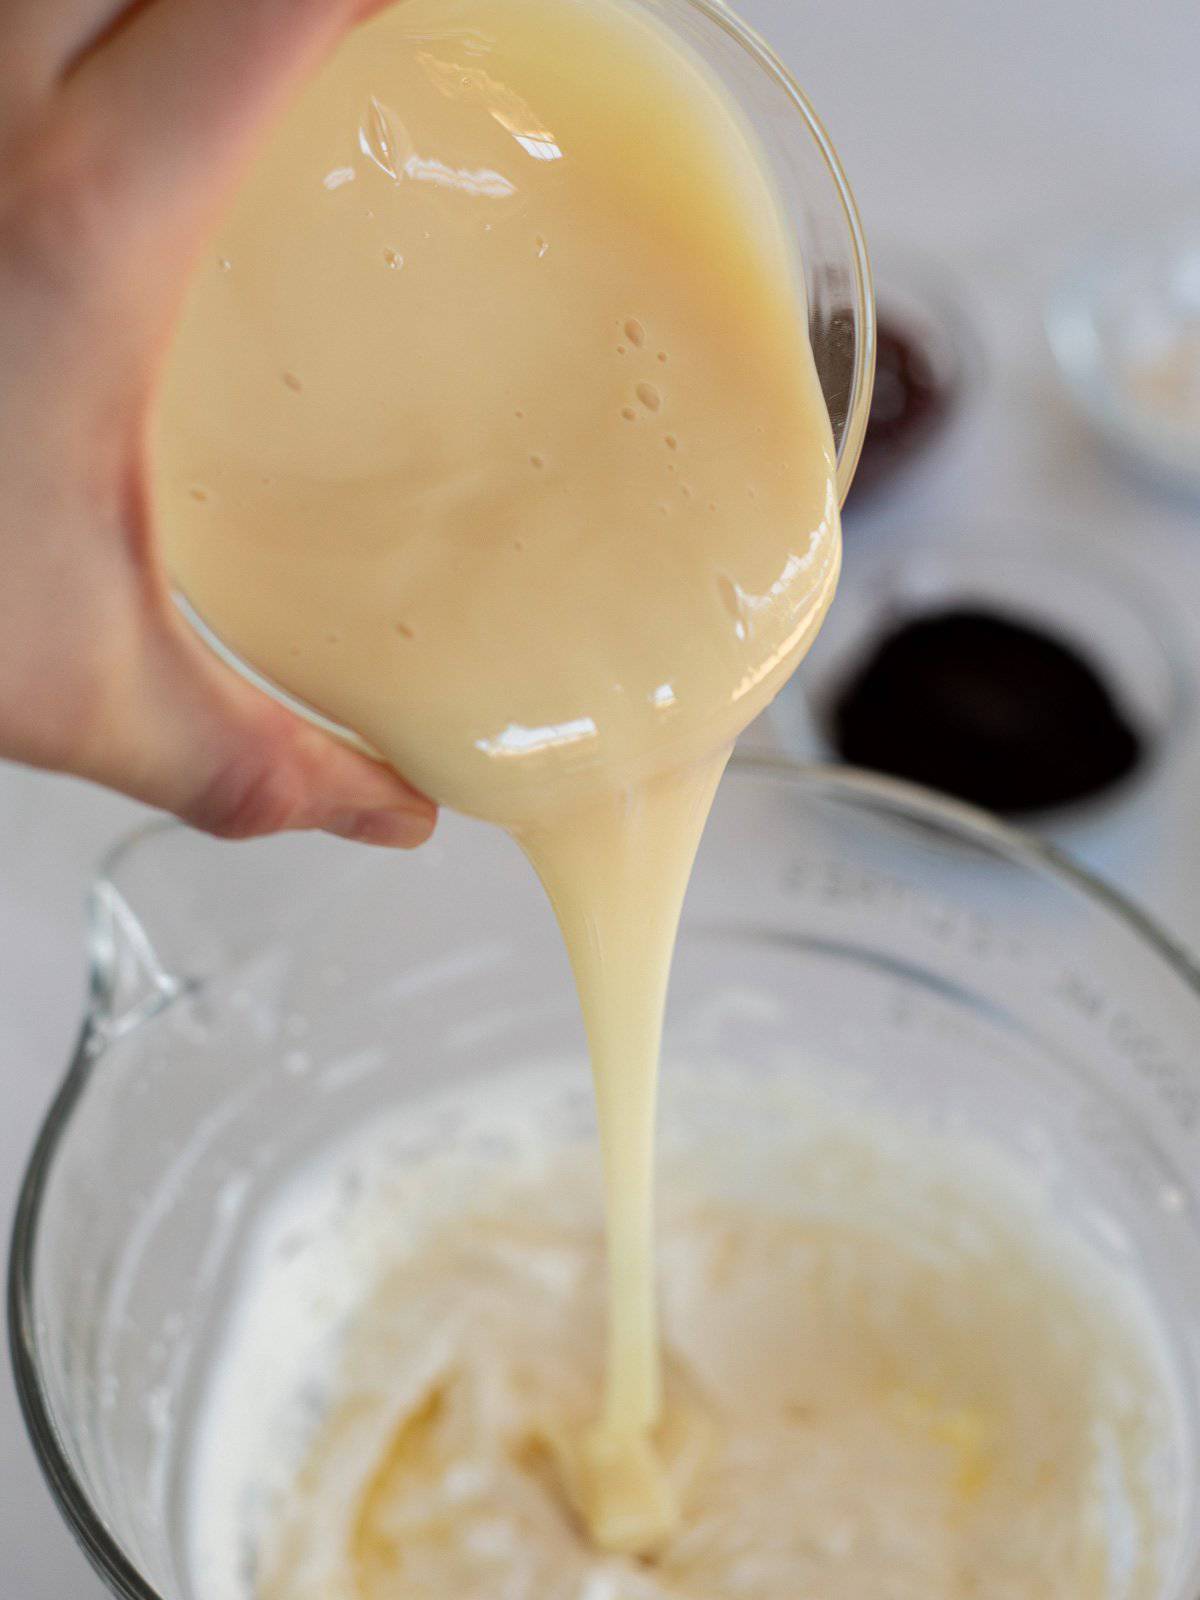 sweetened condensed milk pouring into a glass bowl of whipped cream